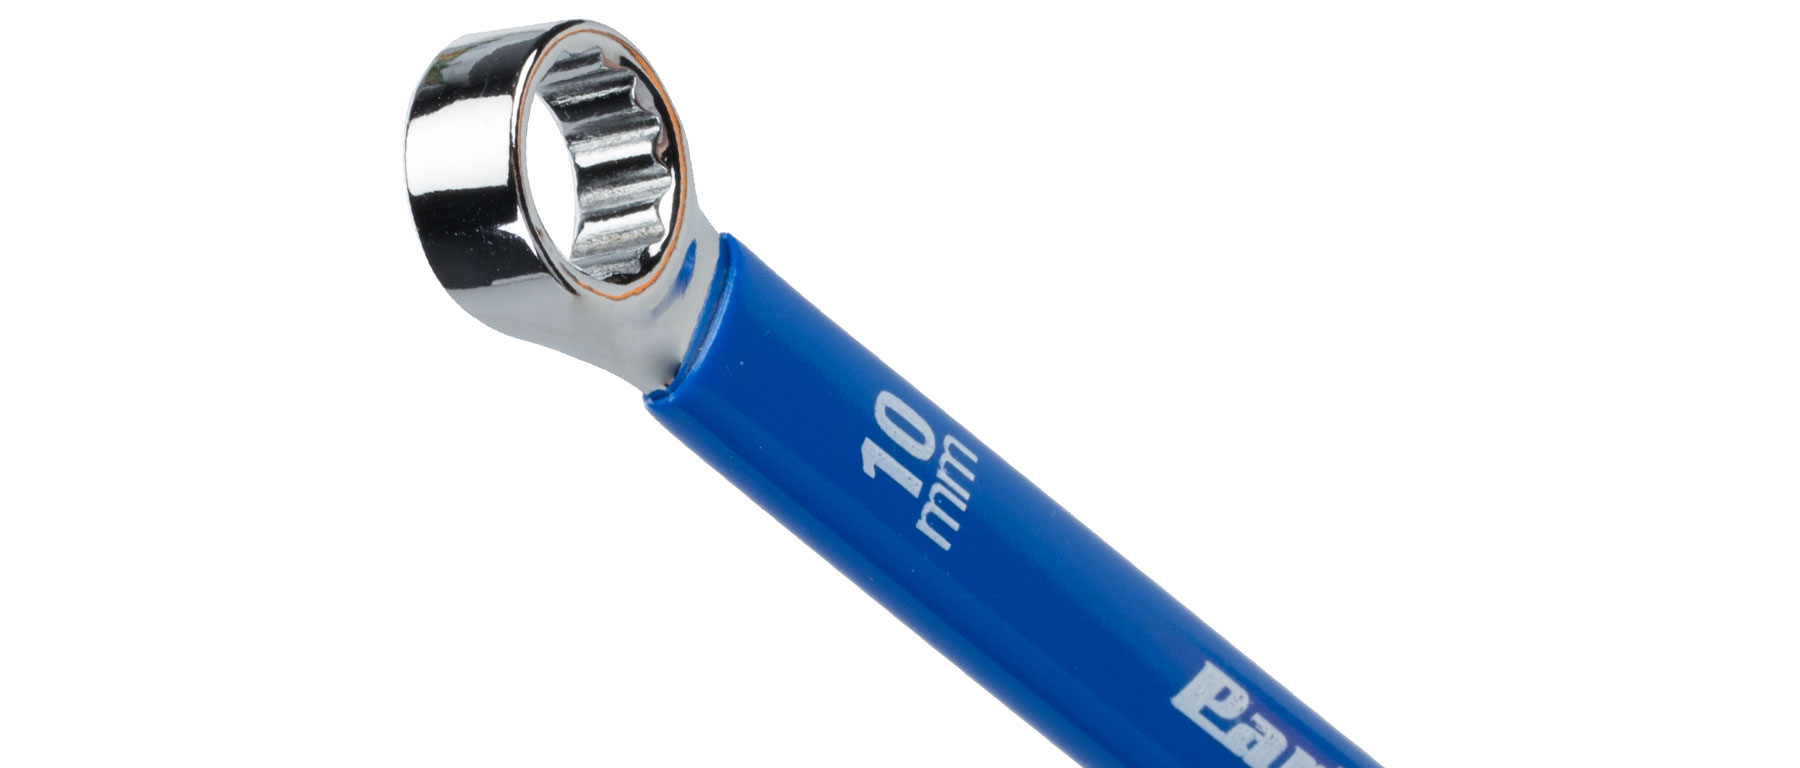 Park Tool MW Metric Wrench